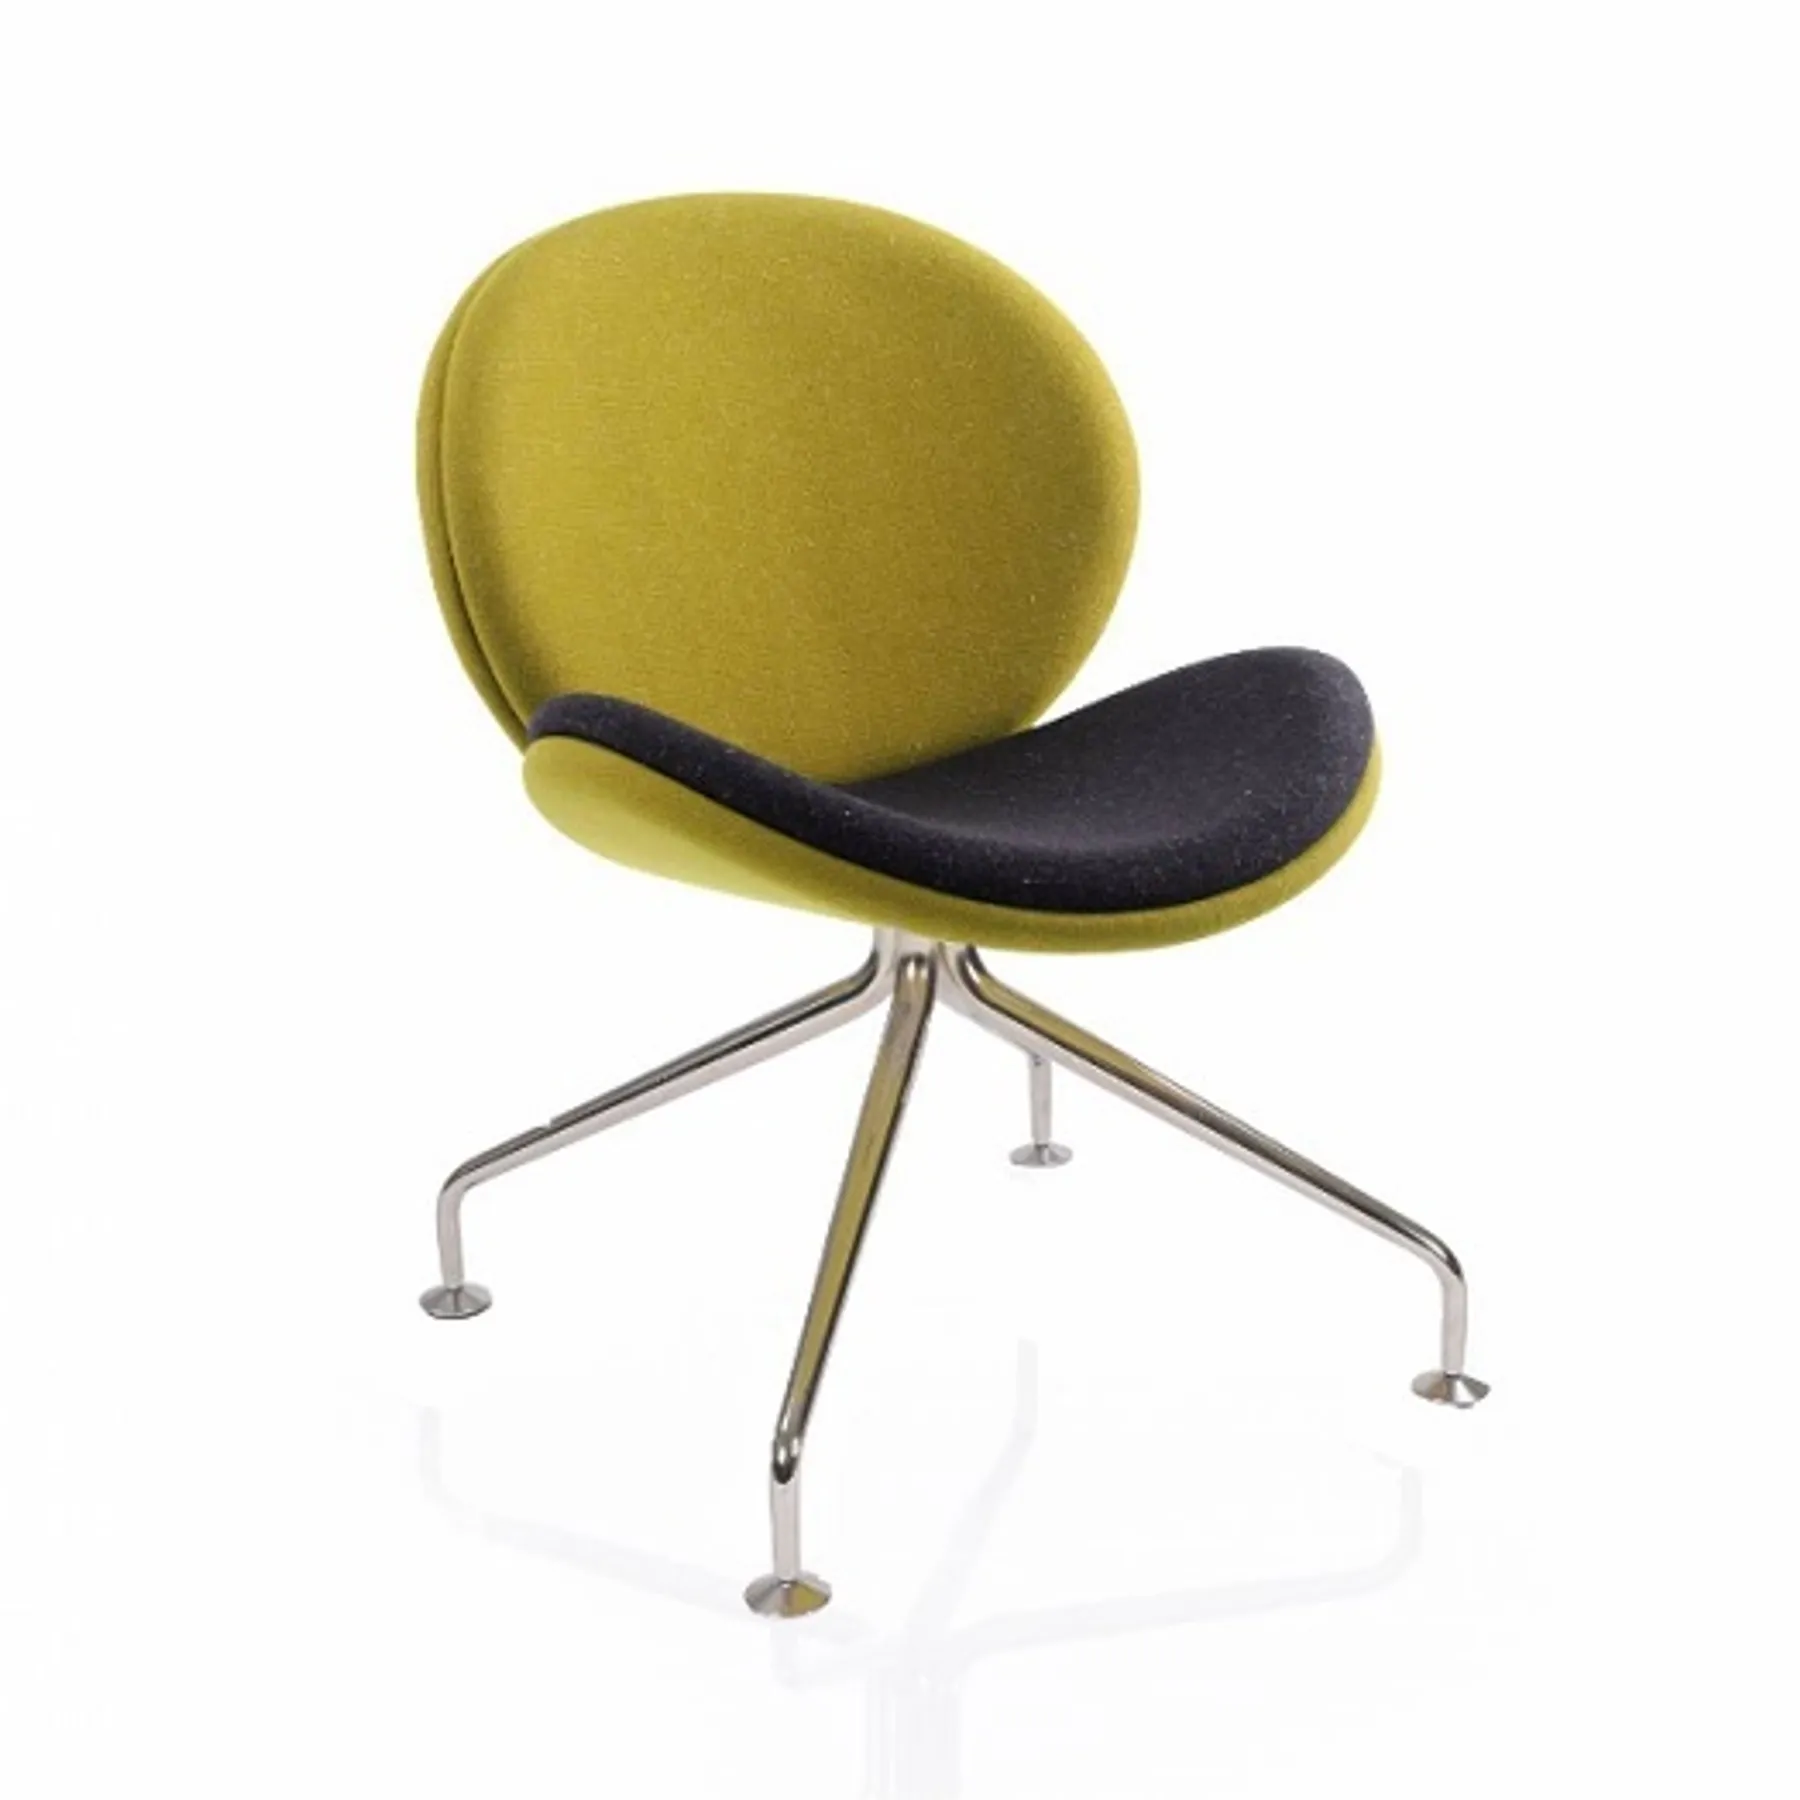 Lof Direct Giggle Chair ocee design giggle1